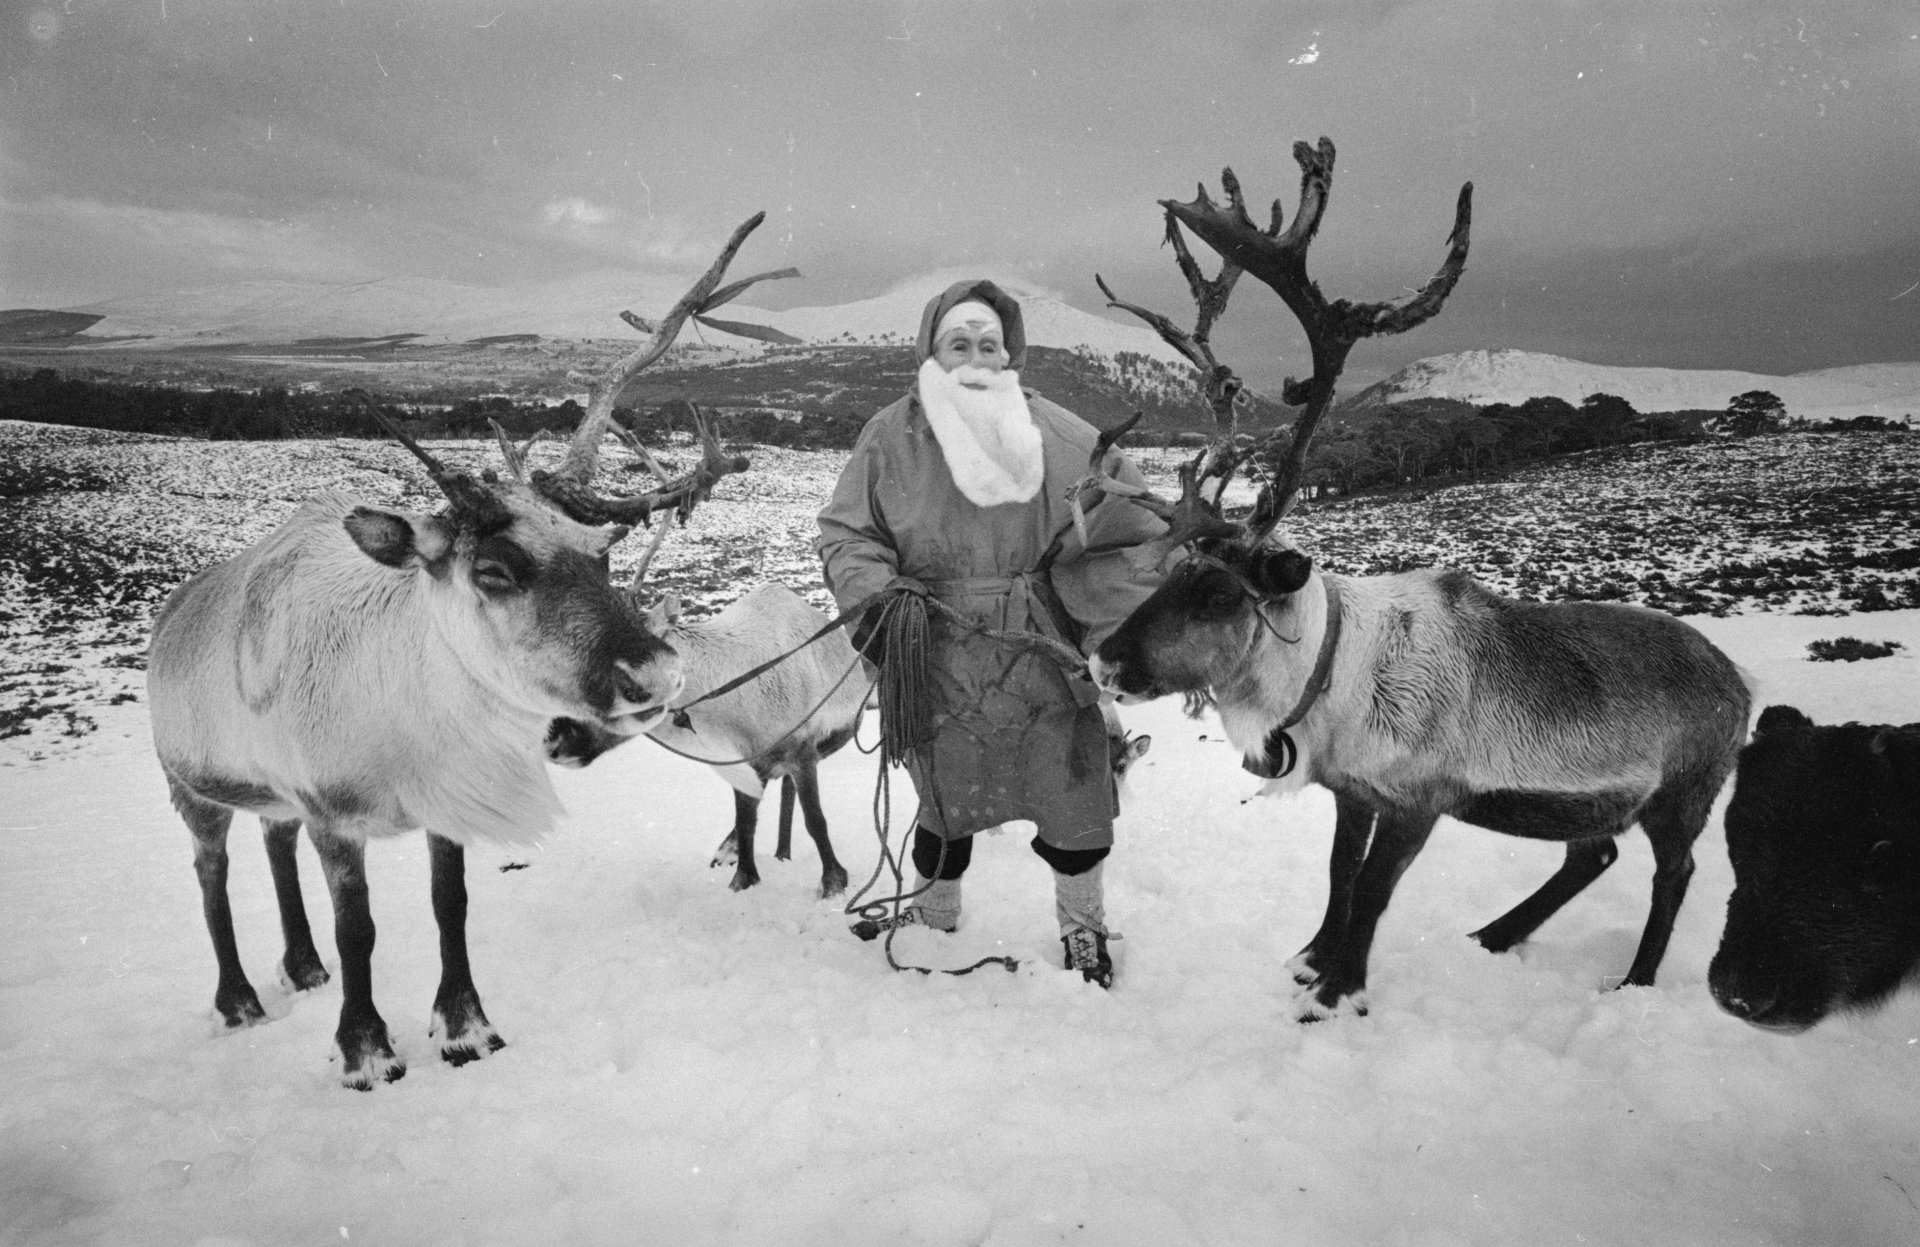 23rd December 1966: Mikel Utsi of Lapland dressed as Santa Claus and with the reindeer and sleigh that he uses to deliver presents to children in Aviemore, Scotland. (Photo by Express/Express/Getty Images)